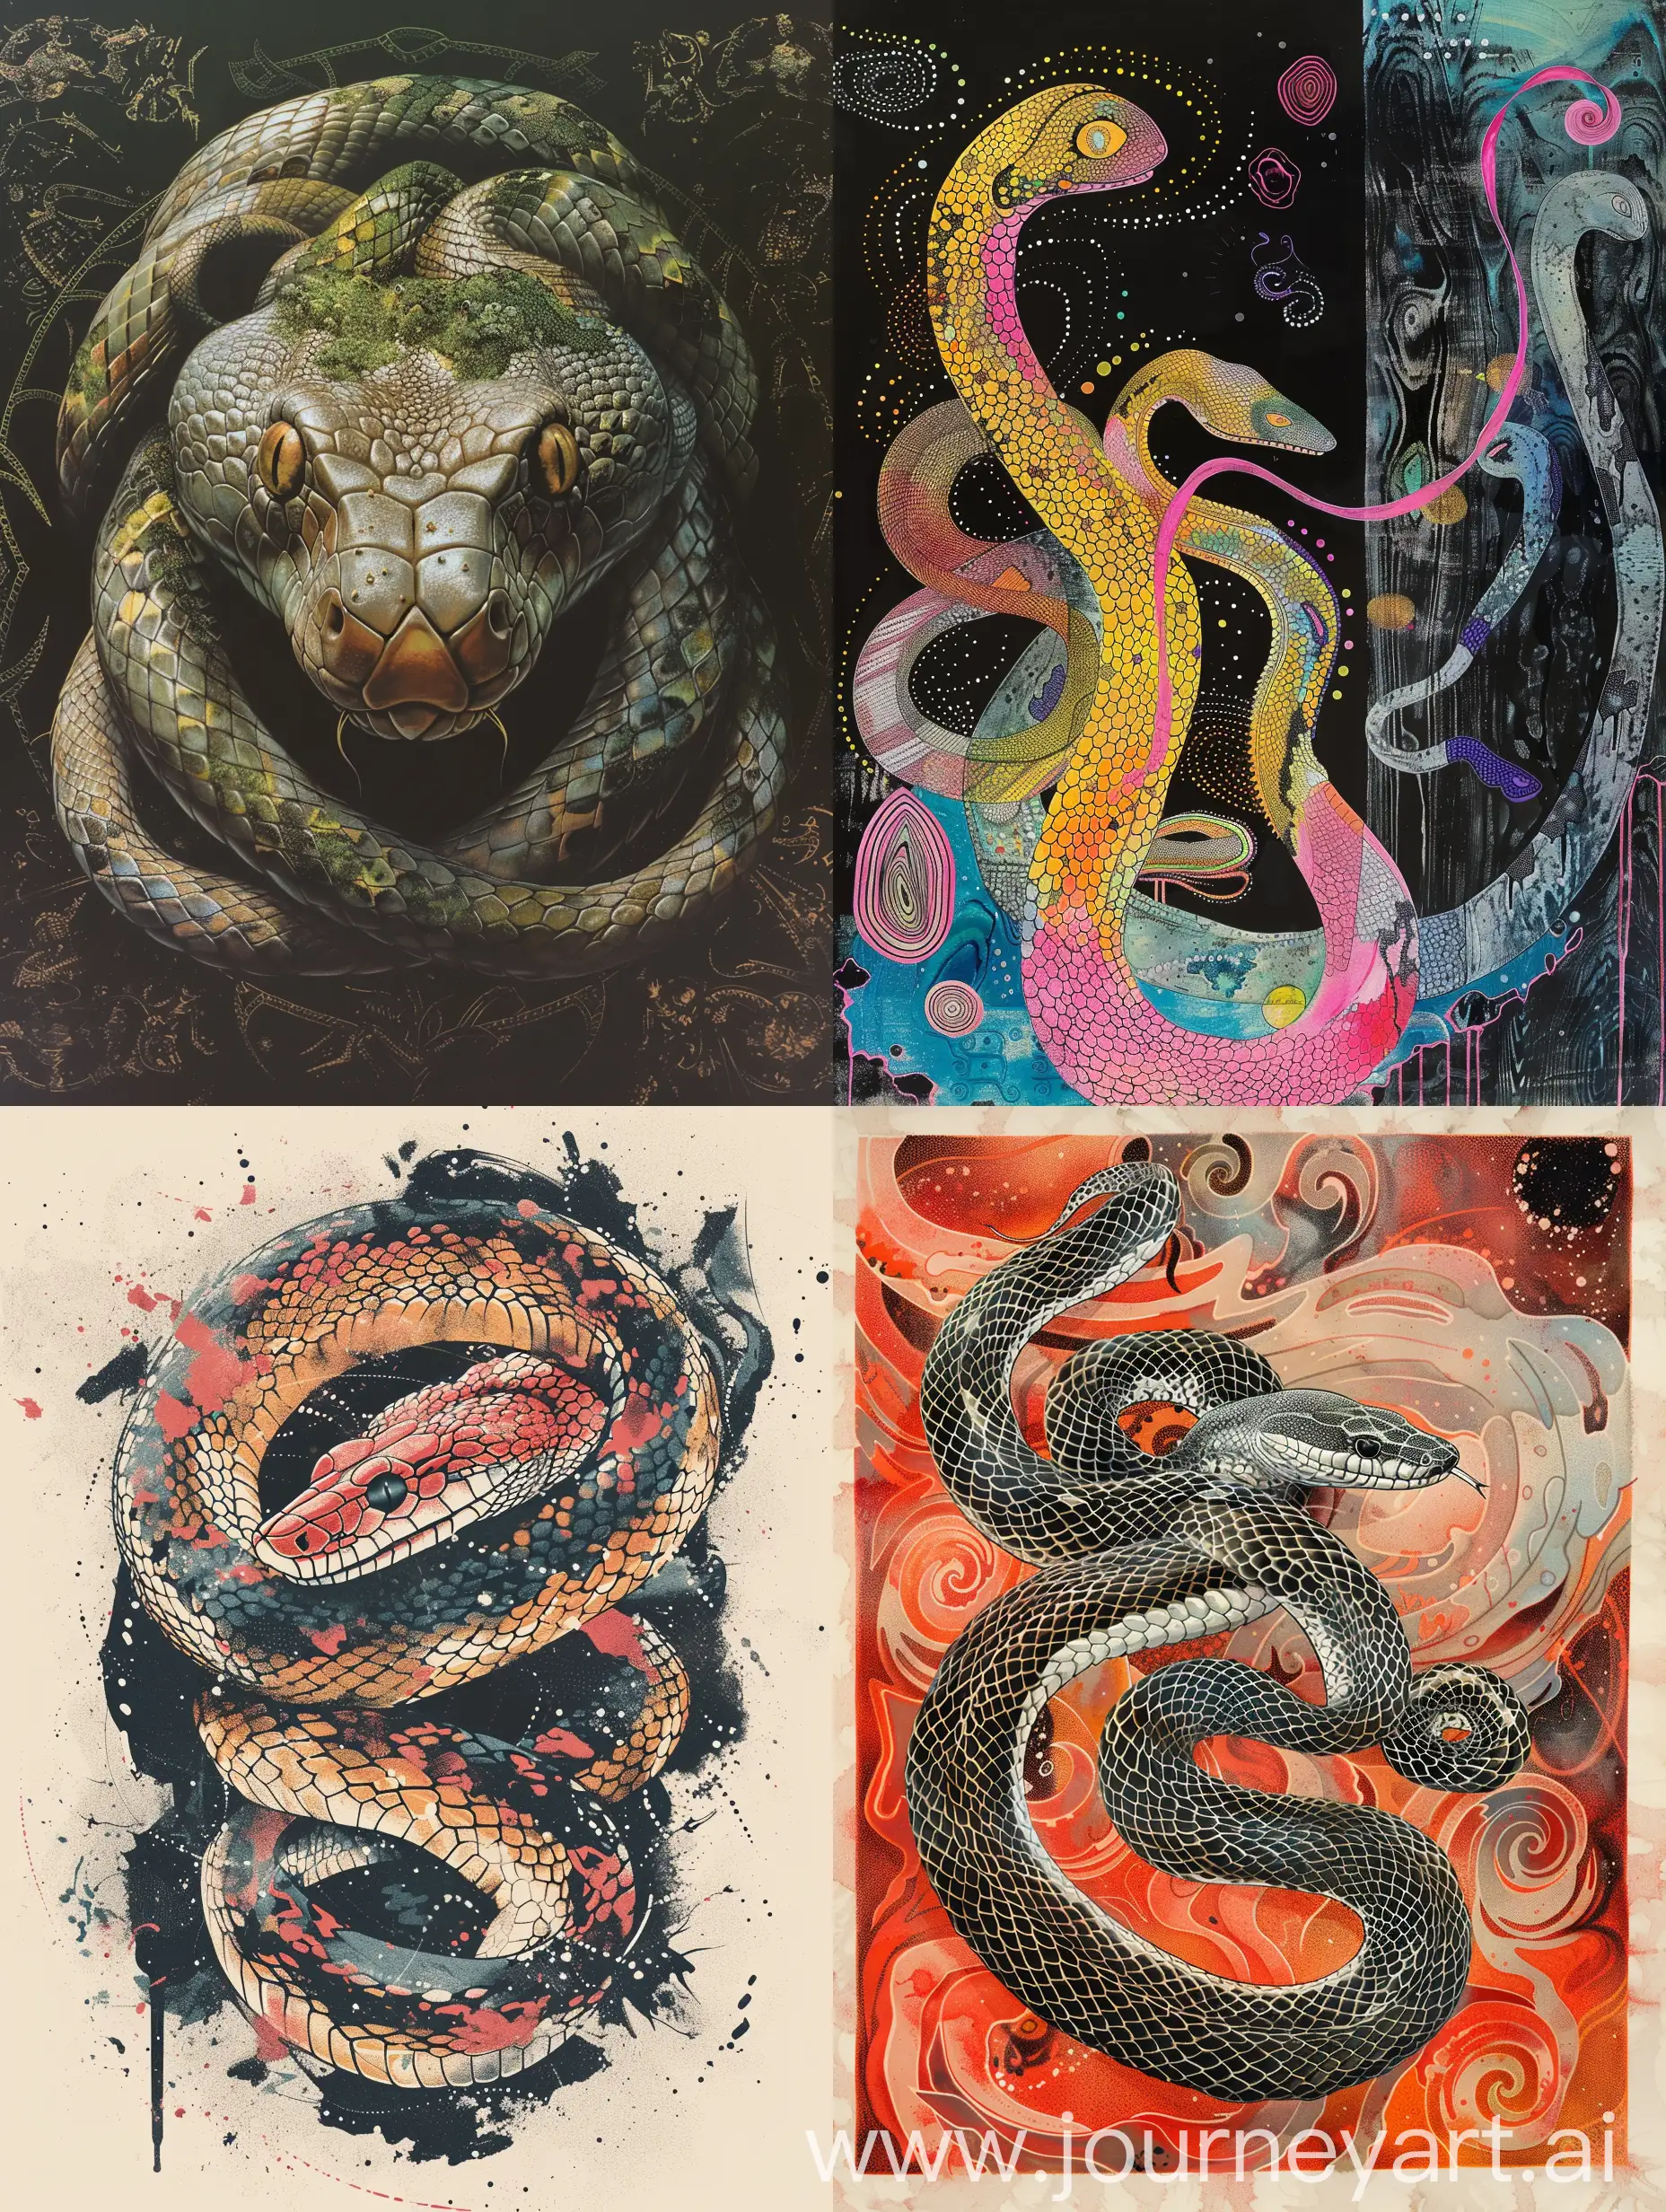 multi-split screen of all species of snake::2 well defined, accurate snake forms ::2 extreme beauty, harmonious design, variety of poses, variety of recognizable snakes::1.6 maximalist poster design by Ernst Haeckel and kim jung gi and moebius::2.5 vibrant saturated watercolor pencil in black, white, pinks, oranges, blues, teal, pistacchio, and liquid gold highlights::1.8 vignette